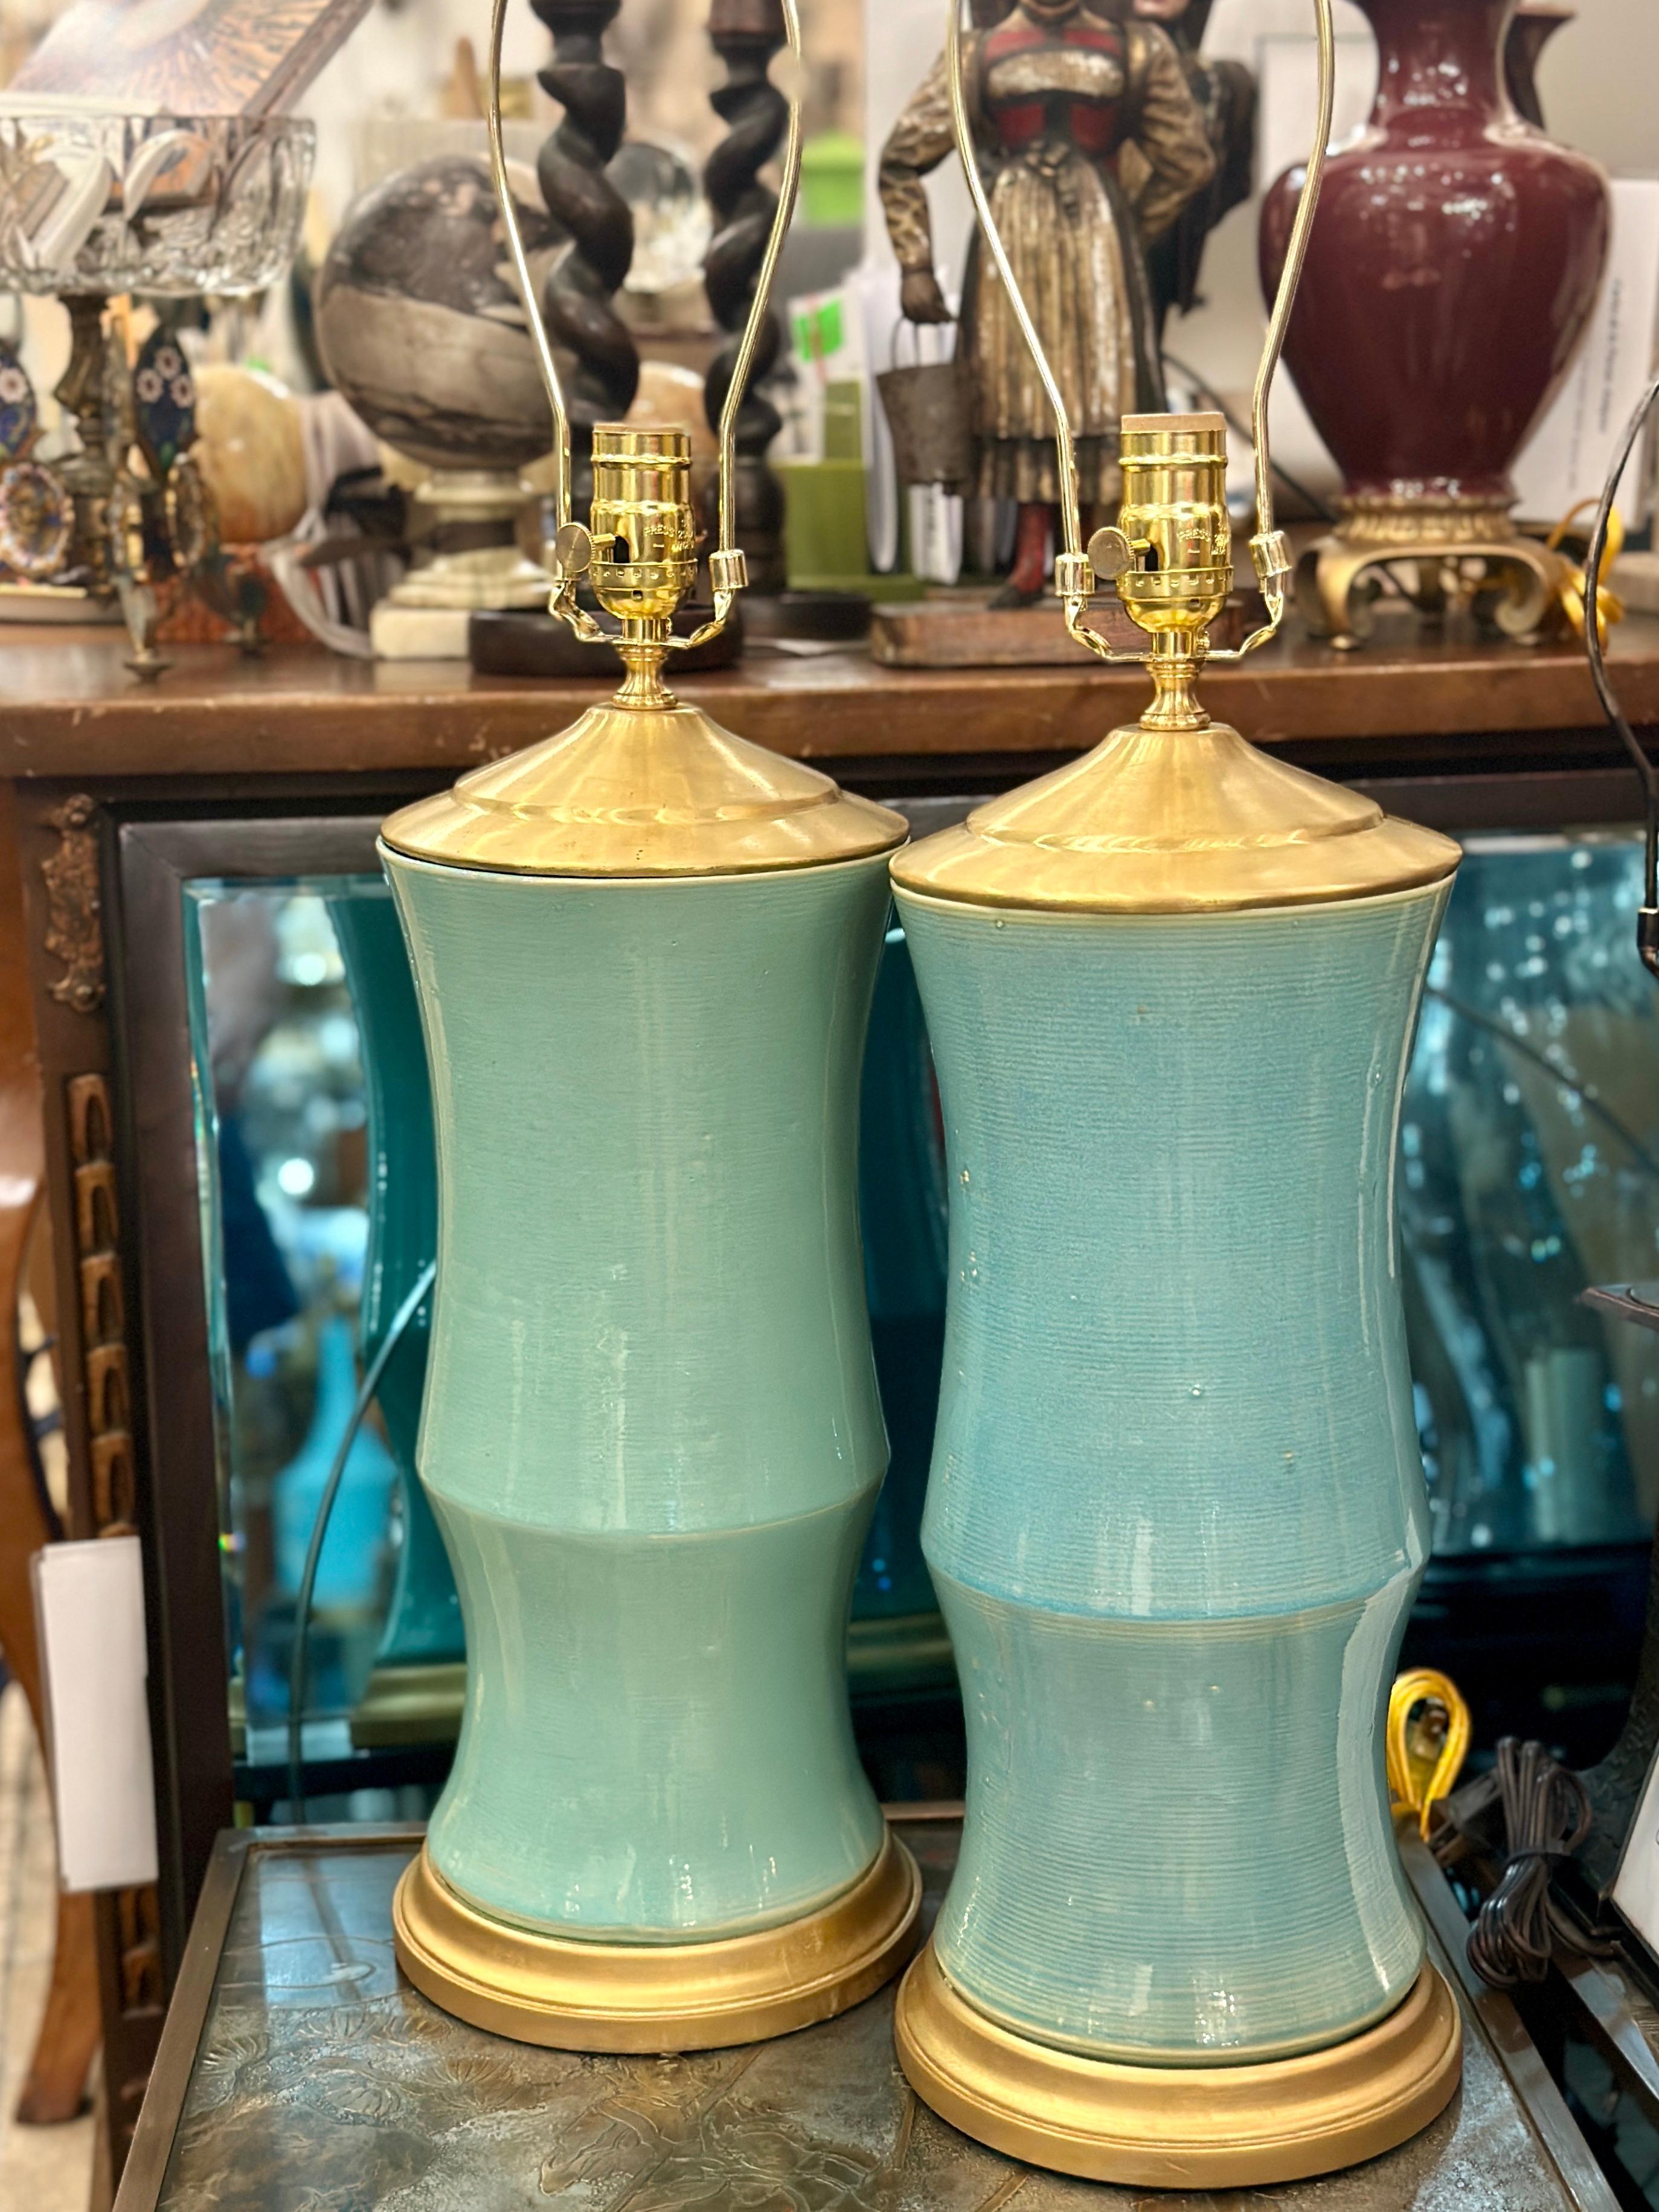 Pair of midcentury circa 1950’s Chinese celadon porcelain table lamps with gilt bases

Measurements:
Height of body: 18″
Height to shade rest: 28″
Diameter: 7.5″